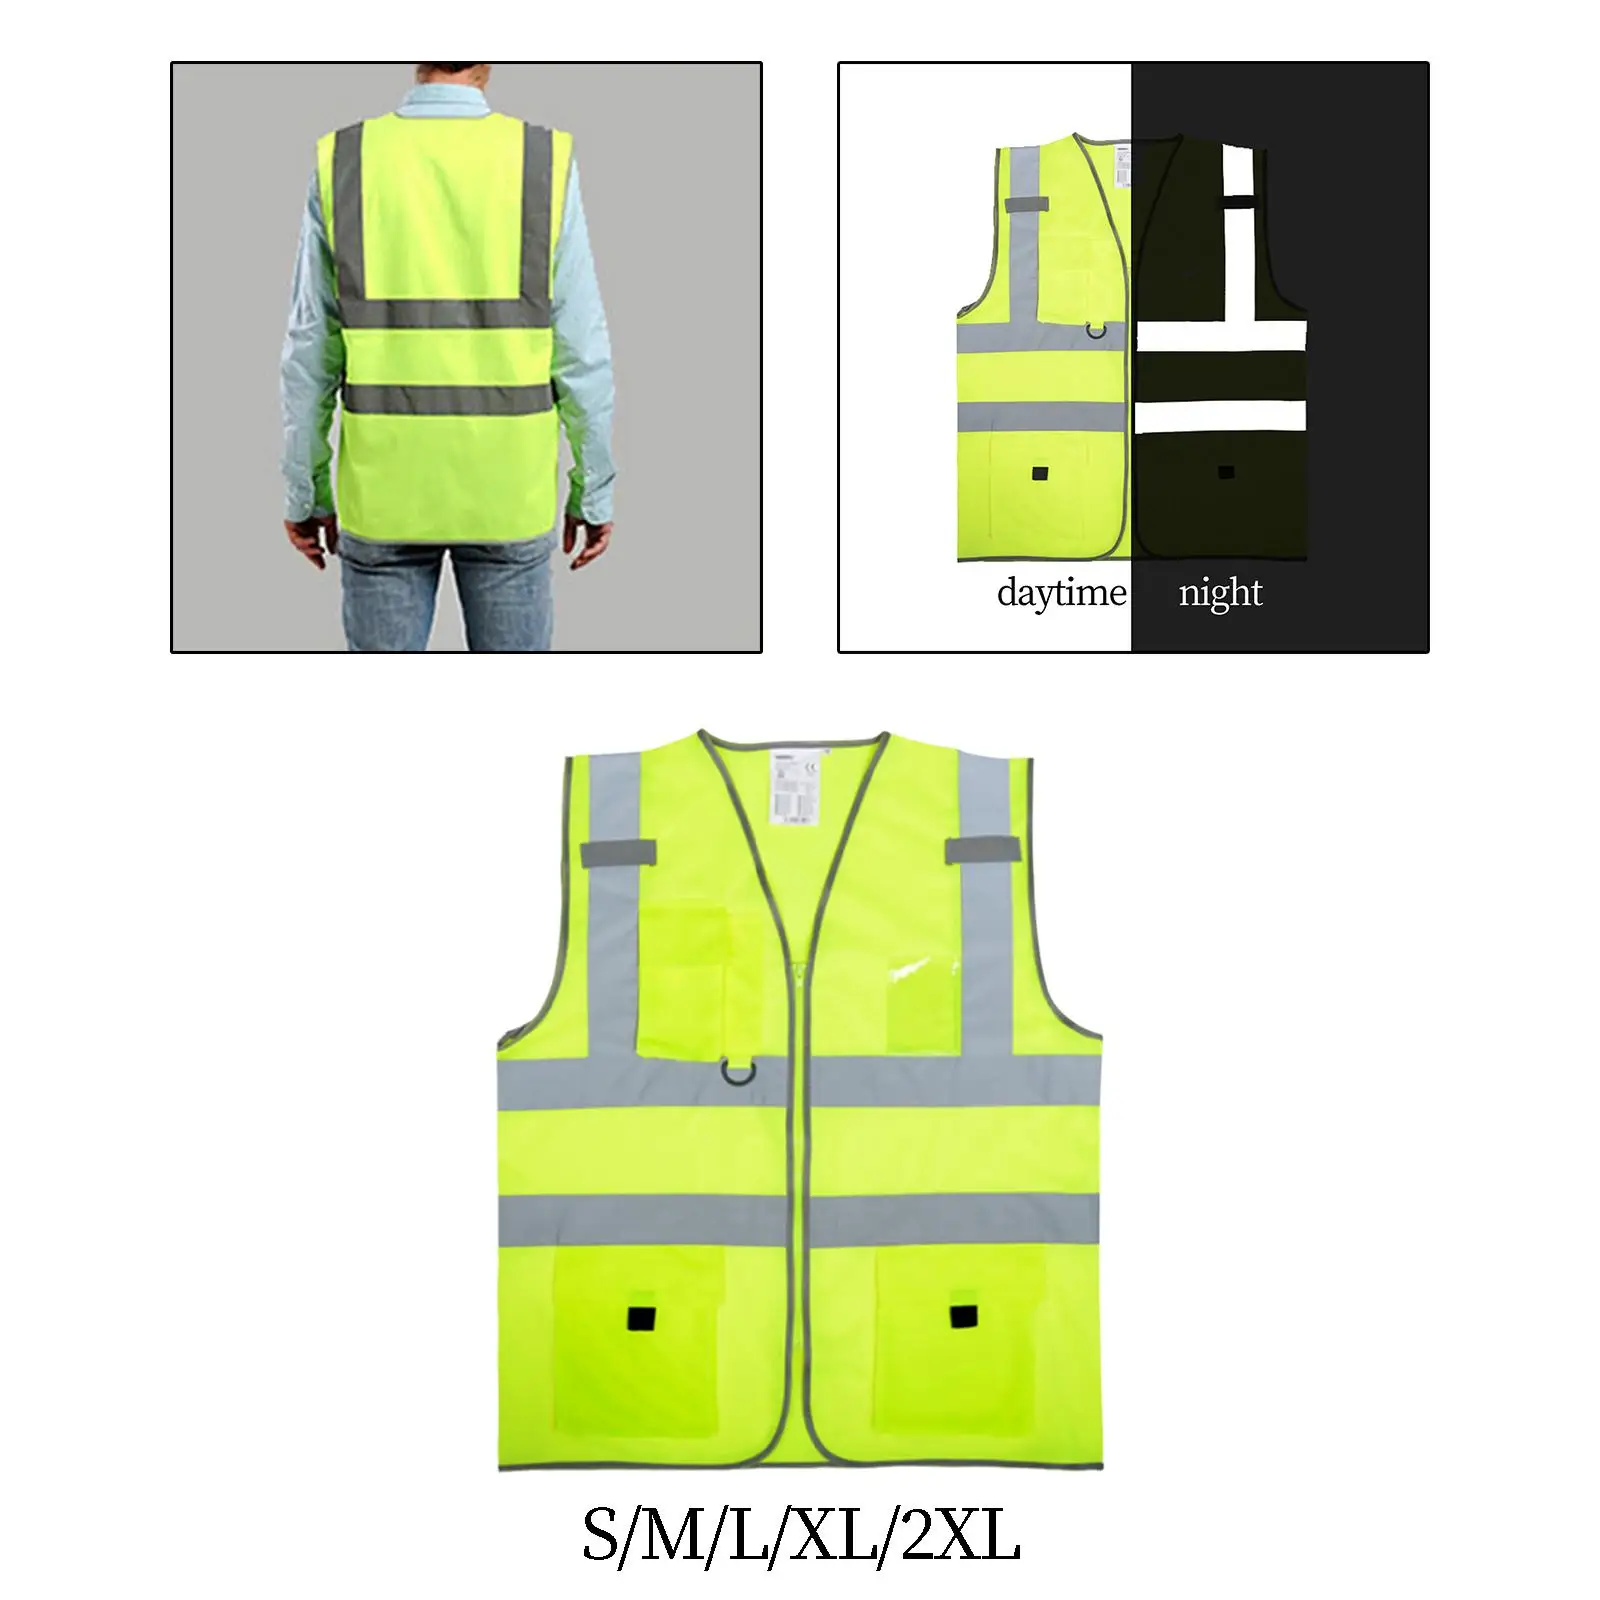 Reflective Vest Sleeveless Highlight Engineer Vest Construction Protector for Workers Indoor Construction Racing Running Sports